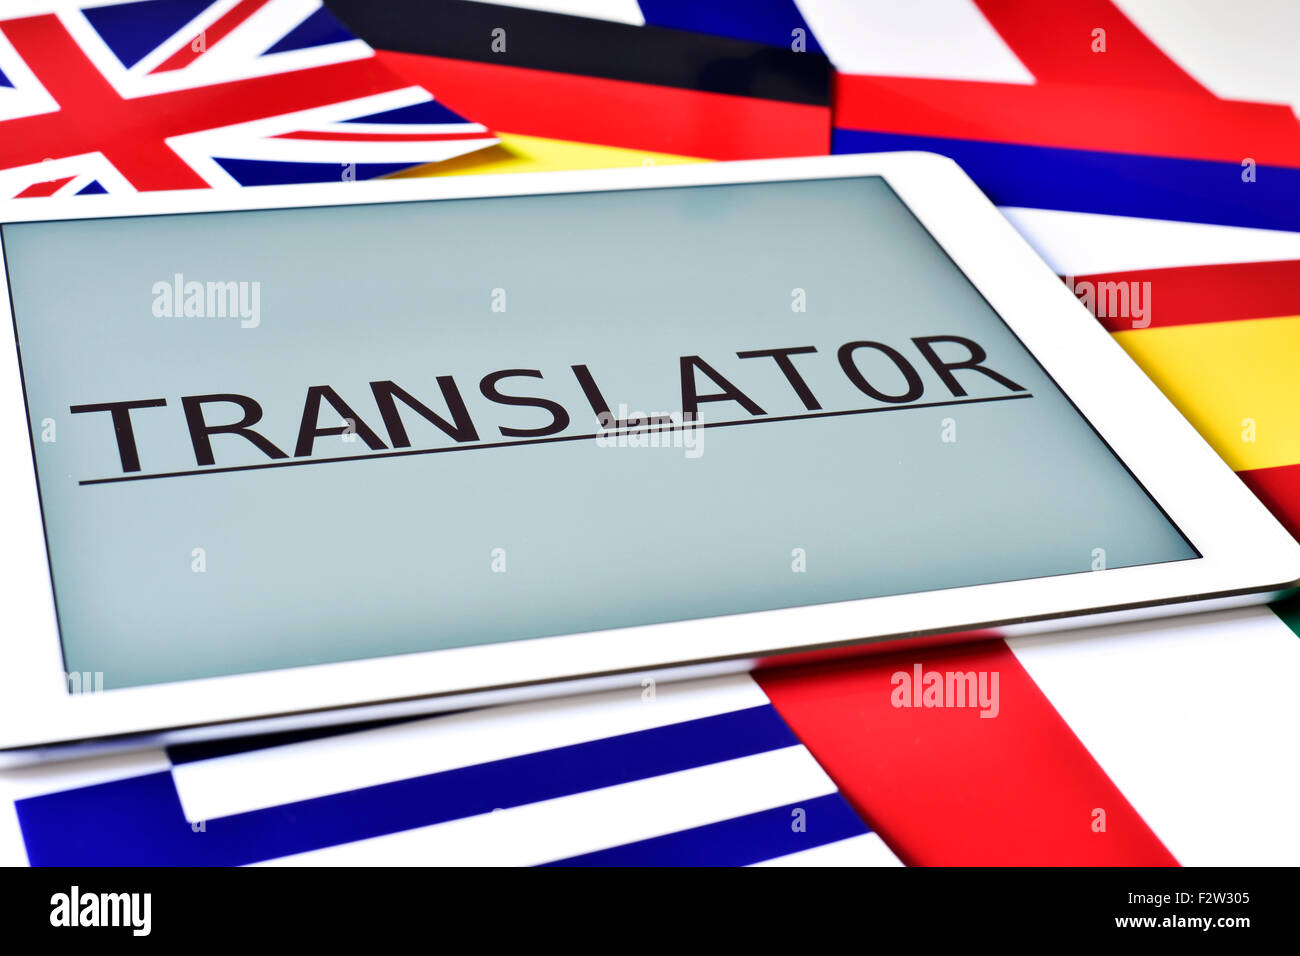 the word translator in the screen of a tablet computer surrounded by flags of different countries Stock Photo